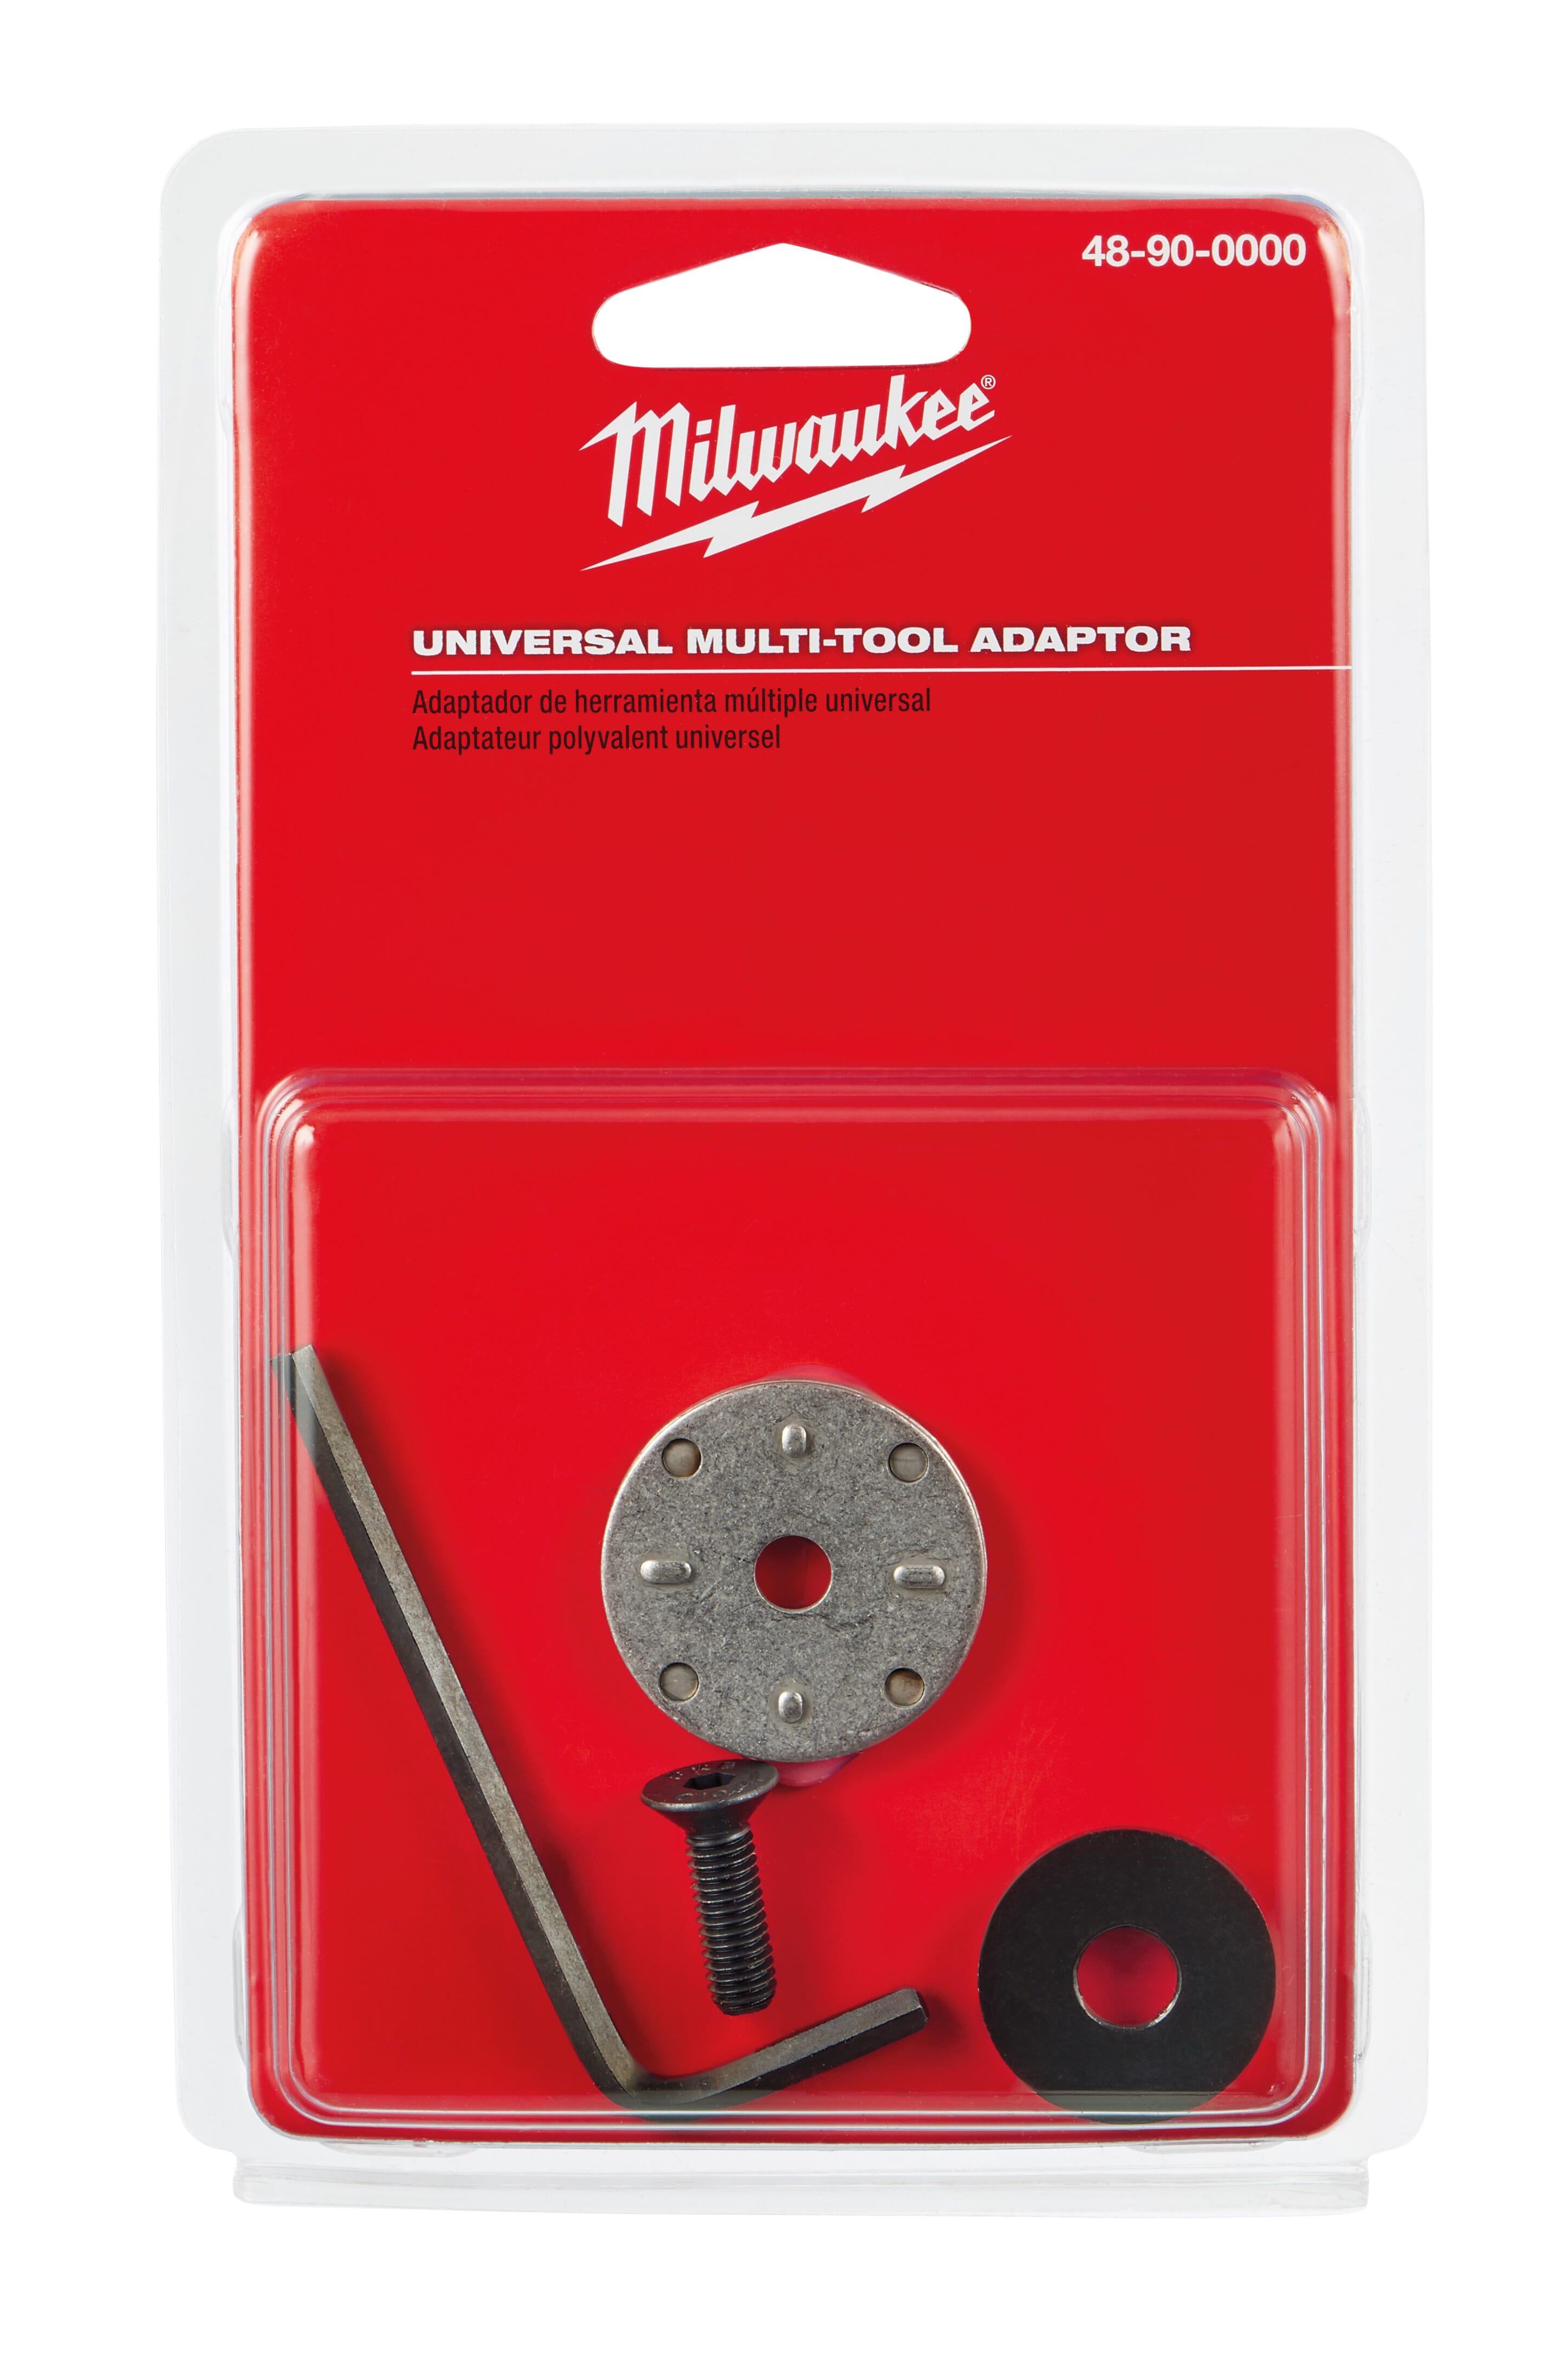 Milwaukee® M18™ 48-90-0000 Universal Multi-Tool Blade Adapter, For Use With Oscillating Tool, Porter Cable, Black and Decker and DeWalt® Brand Multi-Tool, Steel